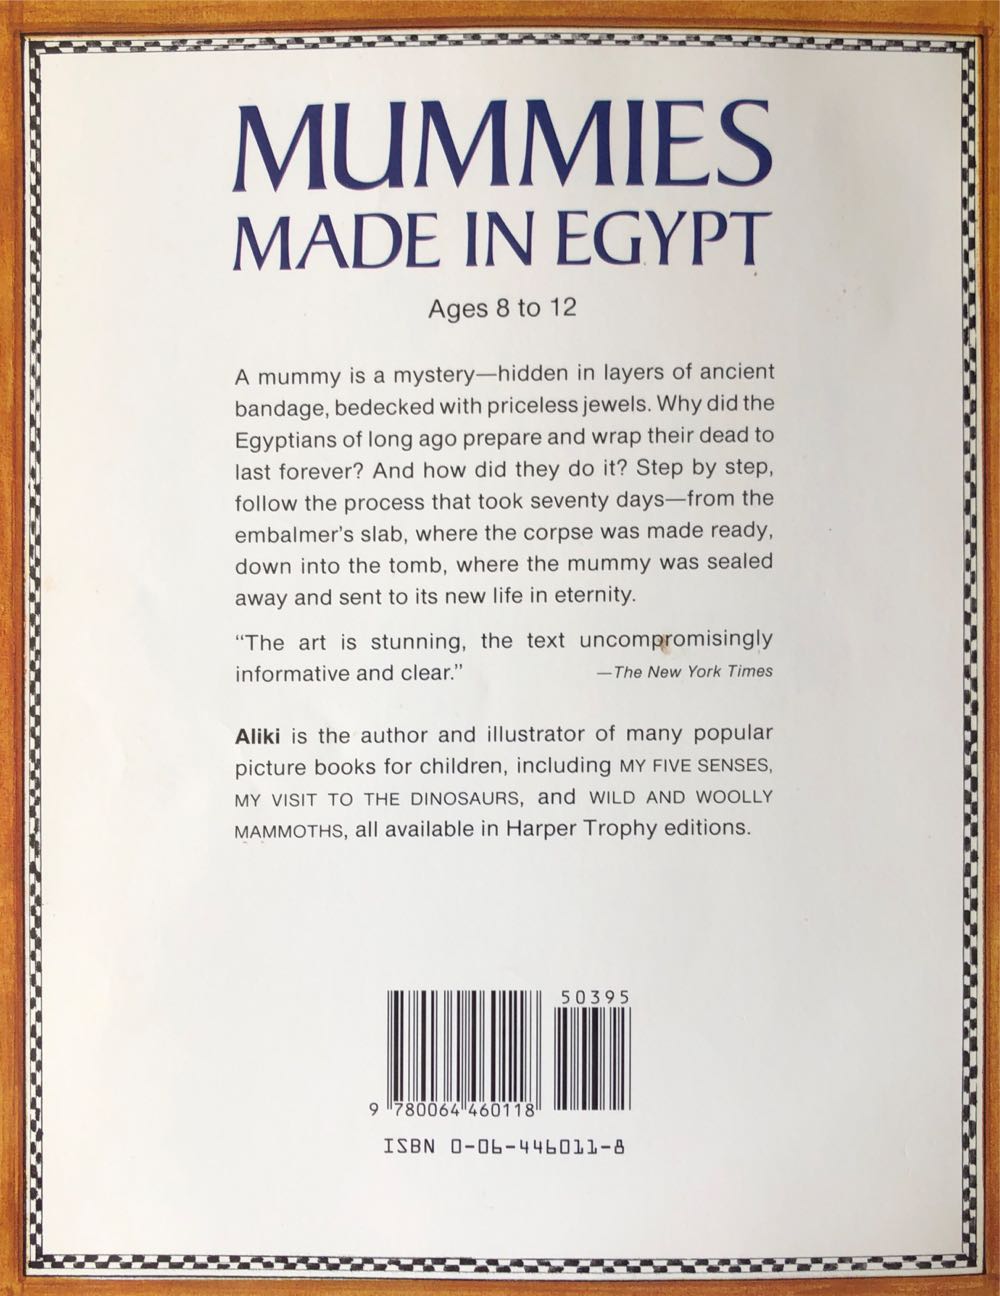 Mummies Made In Egypt - Aliki (Harper Trophy - Paperback) book collectible [Barcode 9780064460118] - Main Image 2